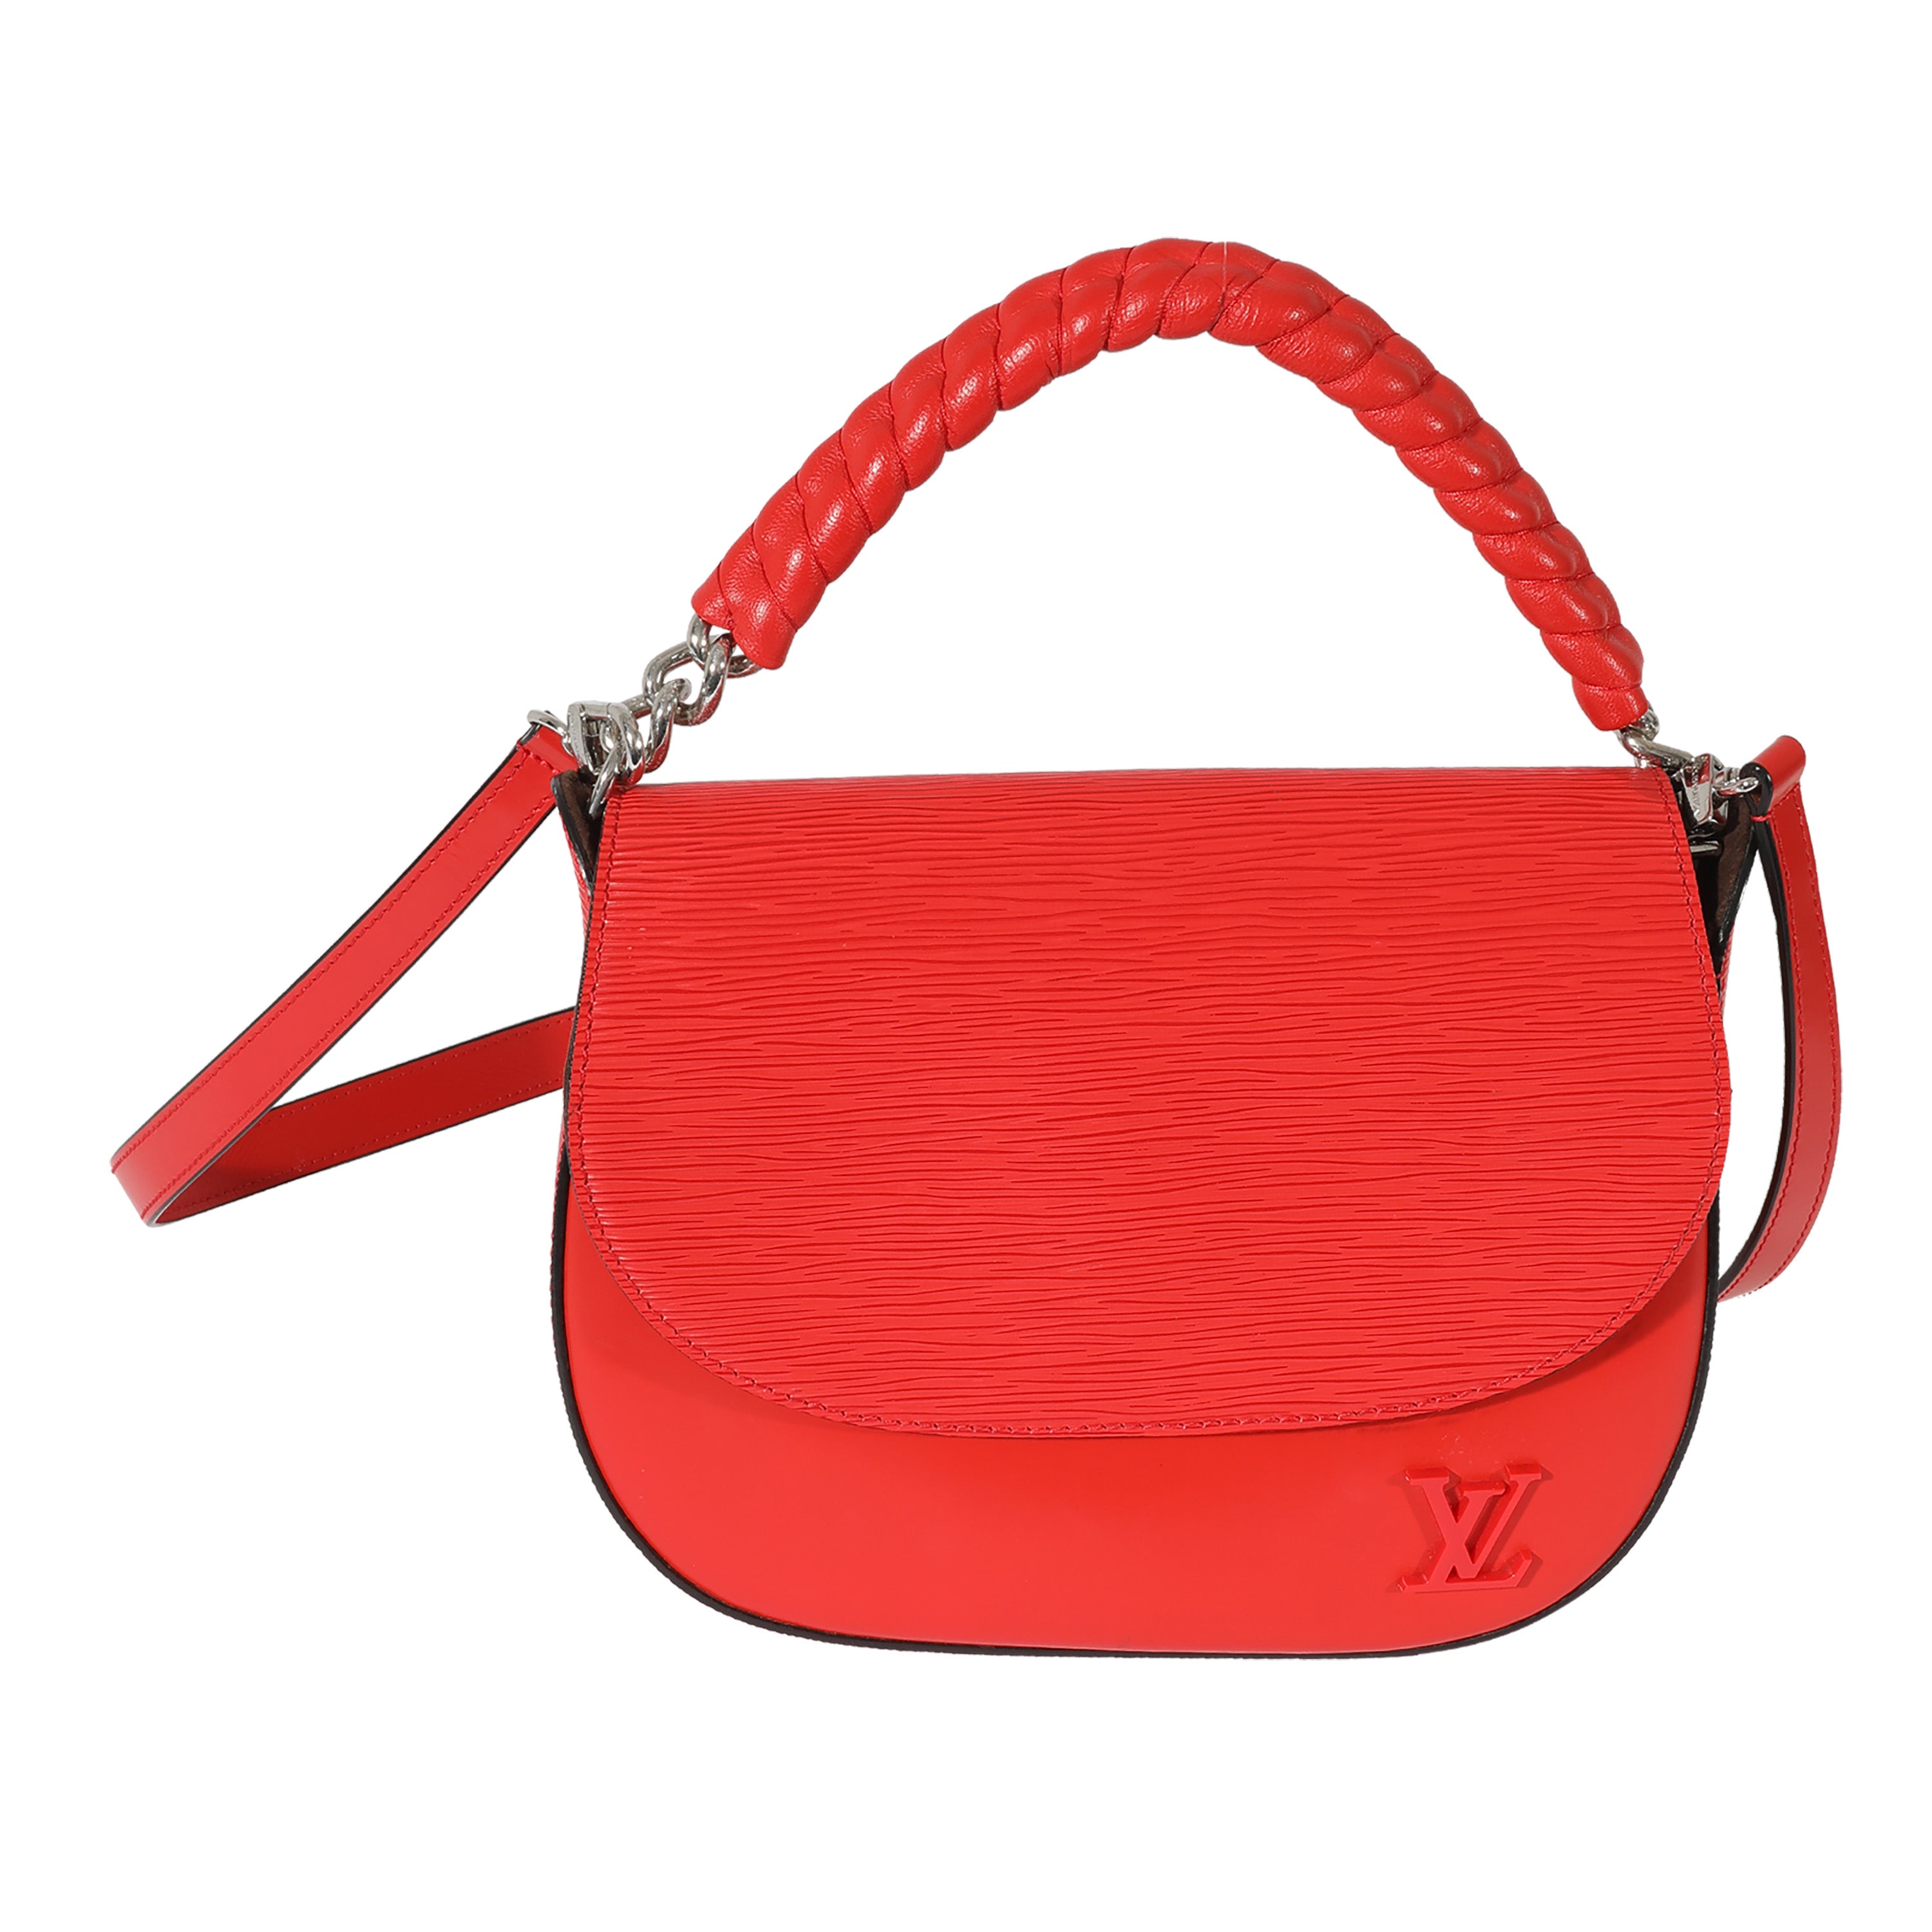 Chanel Red Suede Paris In Rome Messenger Bag, myGemma, NL